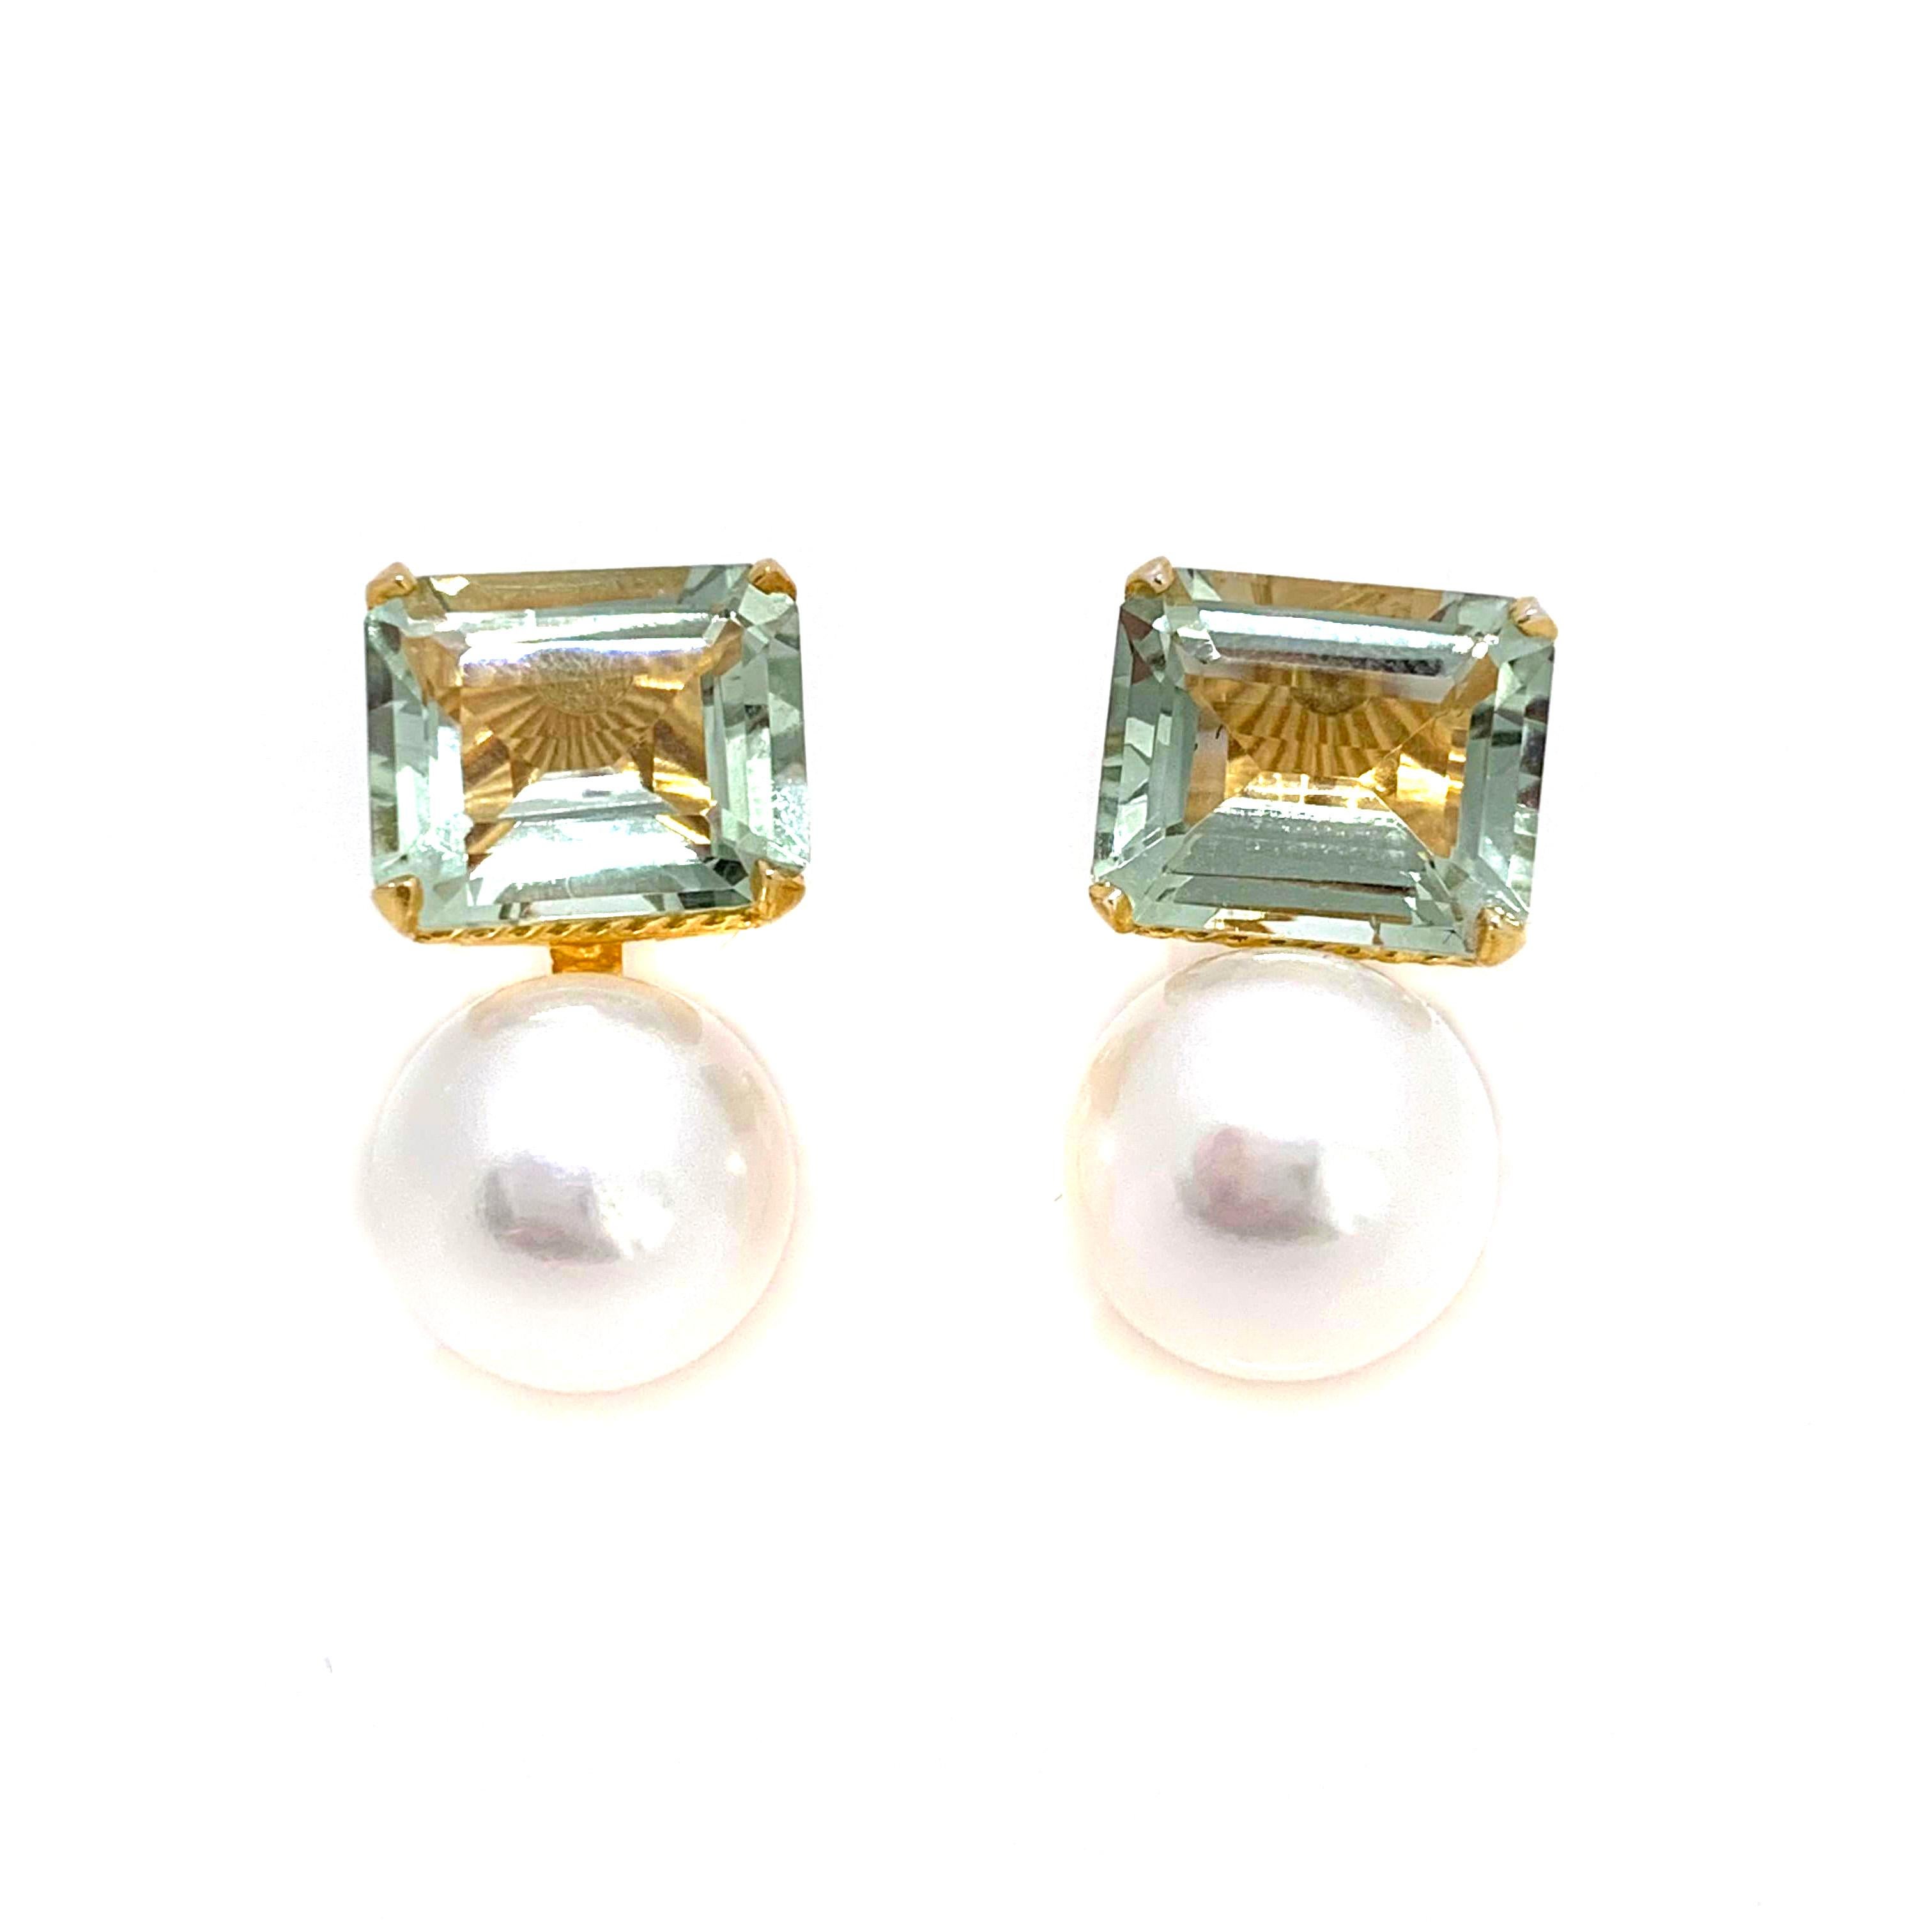 Stunning Bijoux Num Octagon Green Amethyst & Freshwater Pearl Vermeil Earrings. 

The earrings feature 2 beautiful emerald-cut green amethyst and 2 lustrous 12mm cultured freshwater pearl, handset in 18k gold vermeil over sterling silver.  Straight